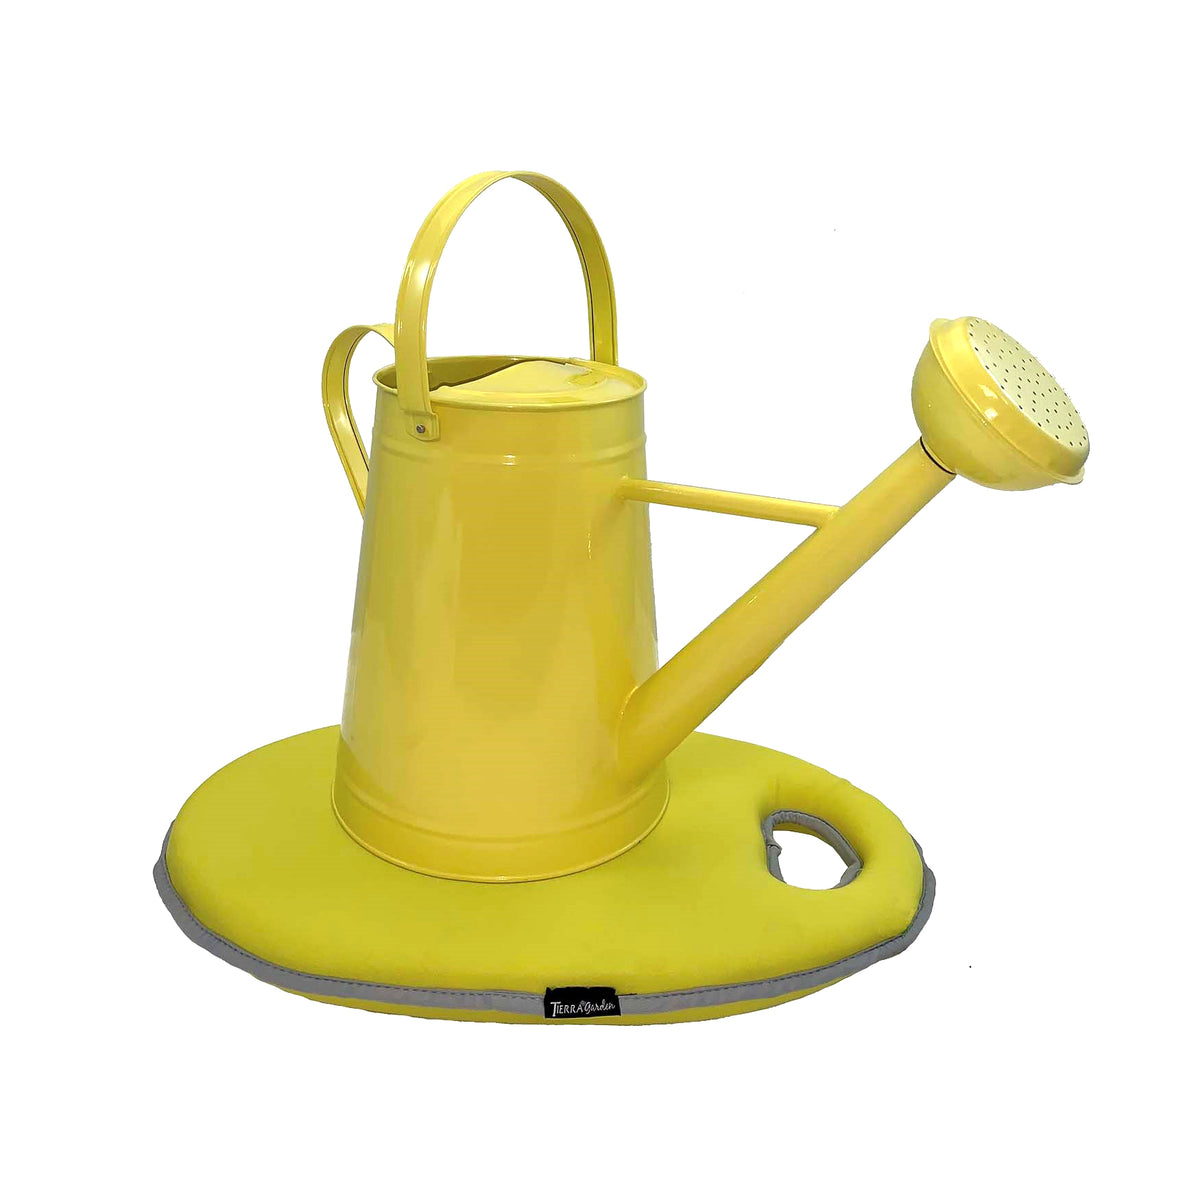 2.1 Gal Yellow Metal Watering Can. Made of steel. 20&quot;Lx9&quot;Wx15.5&quot;H, 1.5 lbs. Yellow waterproof memory foam kneeling cushion included (20&quot;Lx12.25&quot;W, 0.7 lbs).